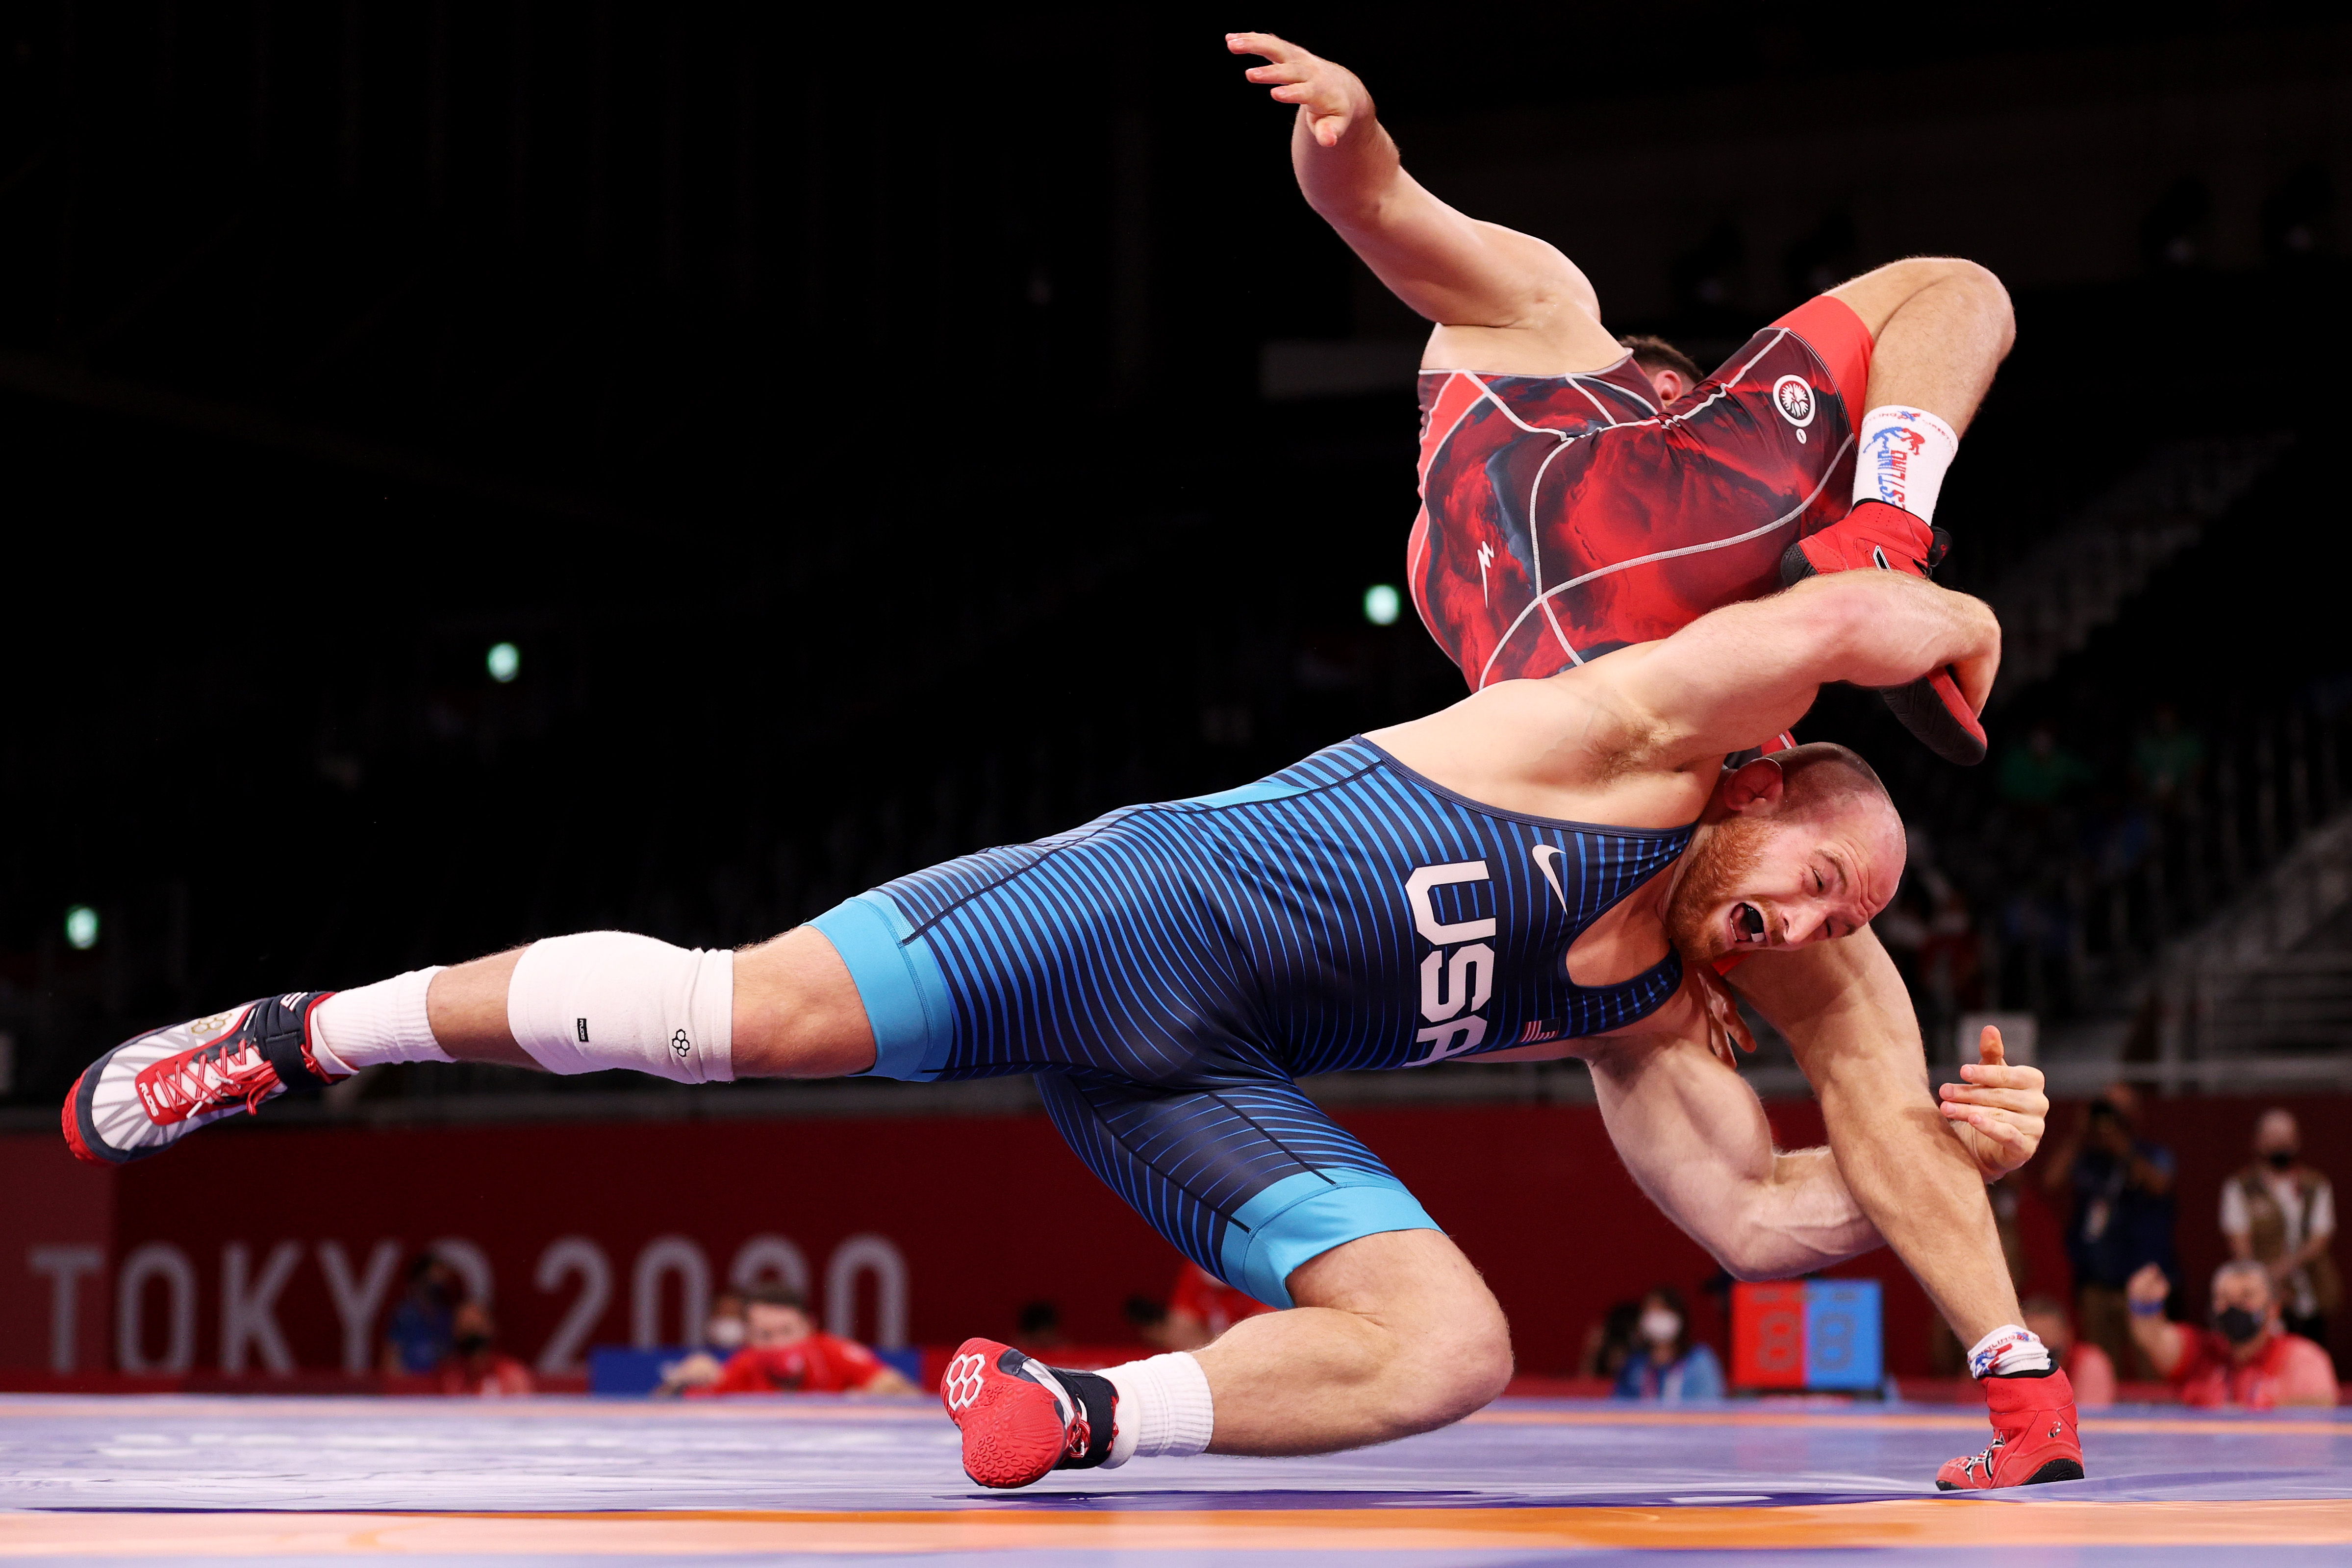 USA Wrestler Kyle Snyder Wins Semifinal Match to Advance to Gold Medal Bout 